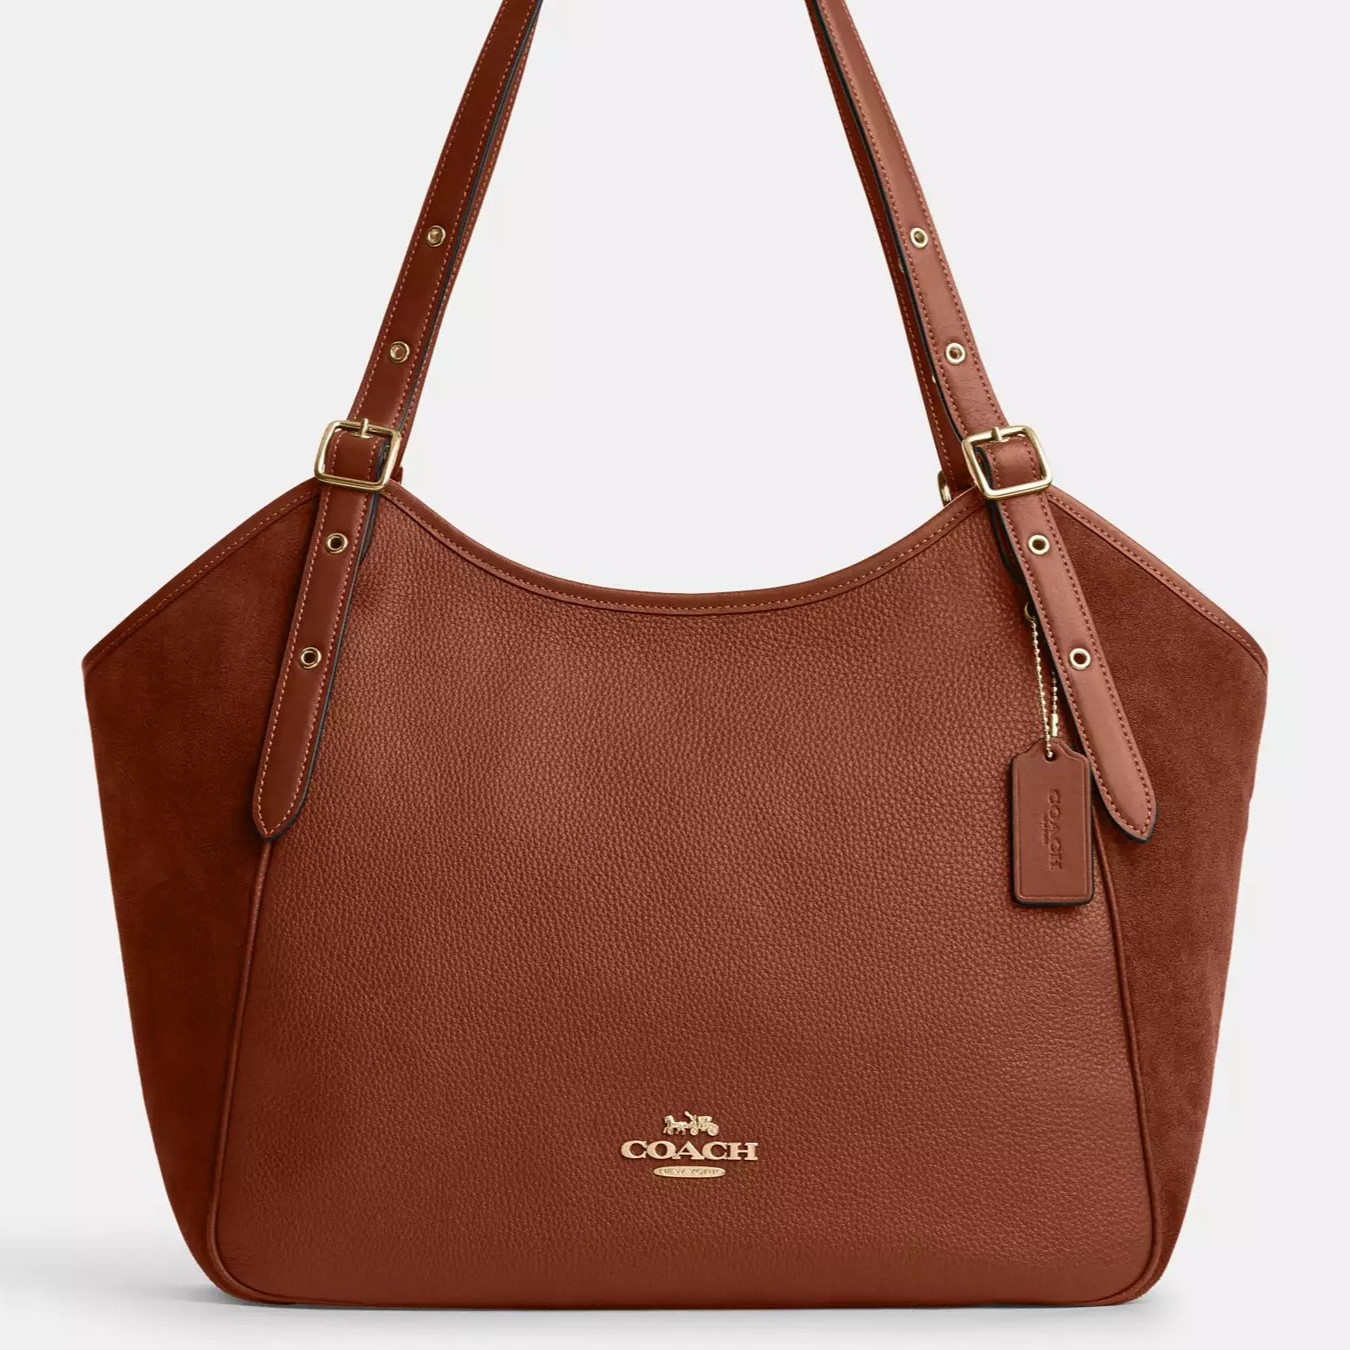 TÚI COACH NỮ MEADOW SHOULDER BAG SUEDE AND REFINED PEBBLE LEATHER REDWOOD CM075 3